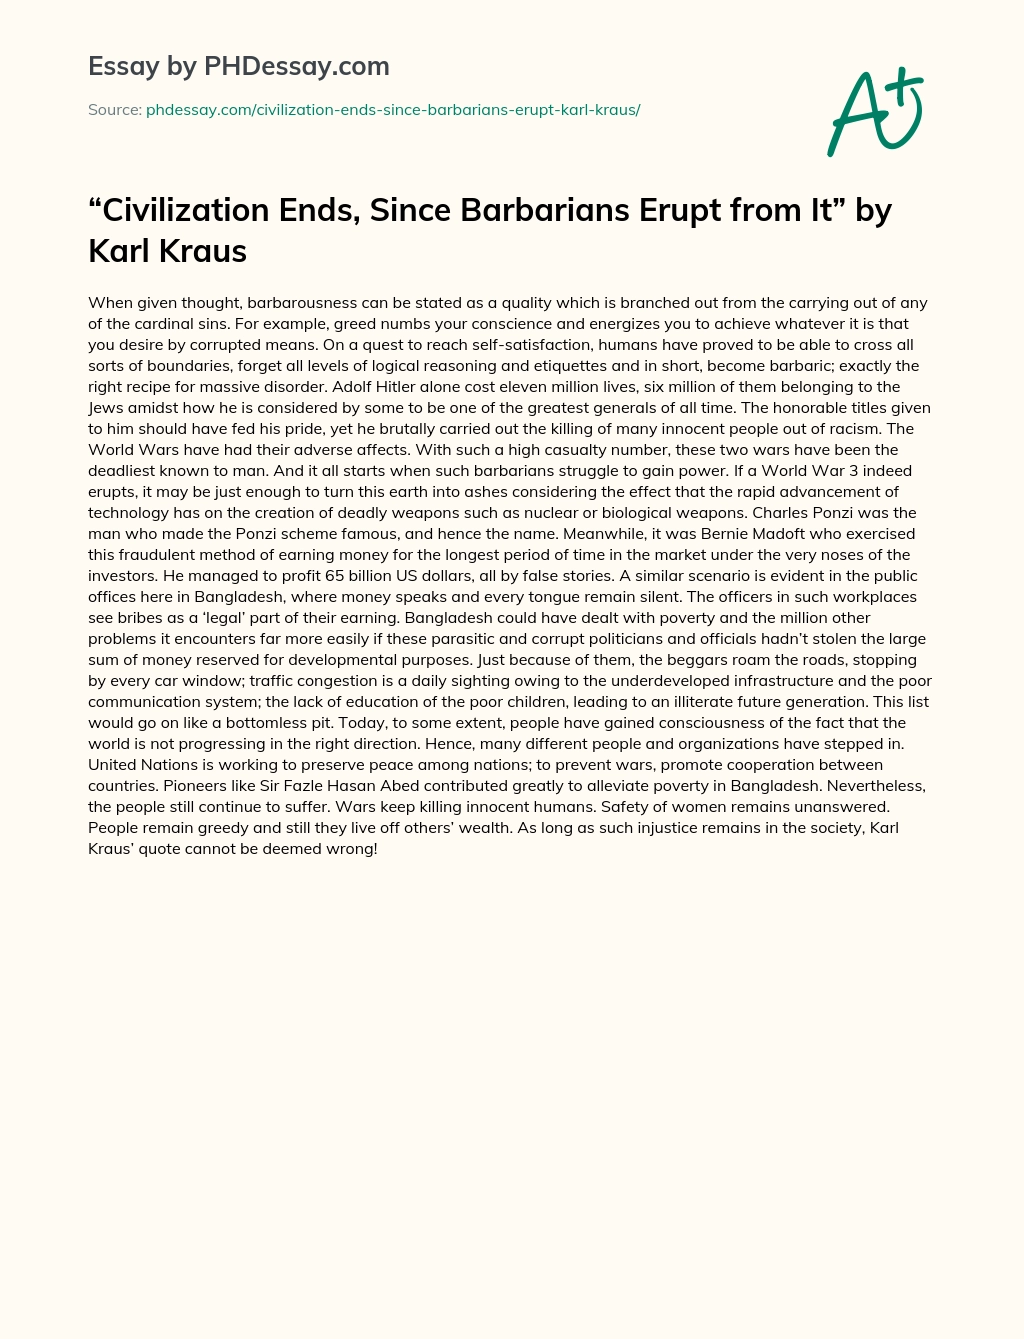 Civilization Ends, Since Barbarians Erupt from It by Karl Kraus essay